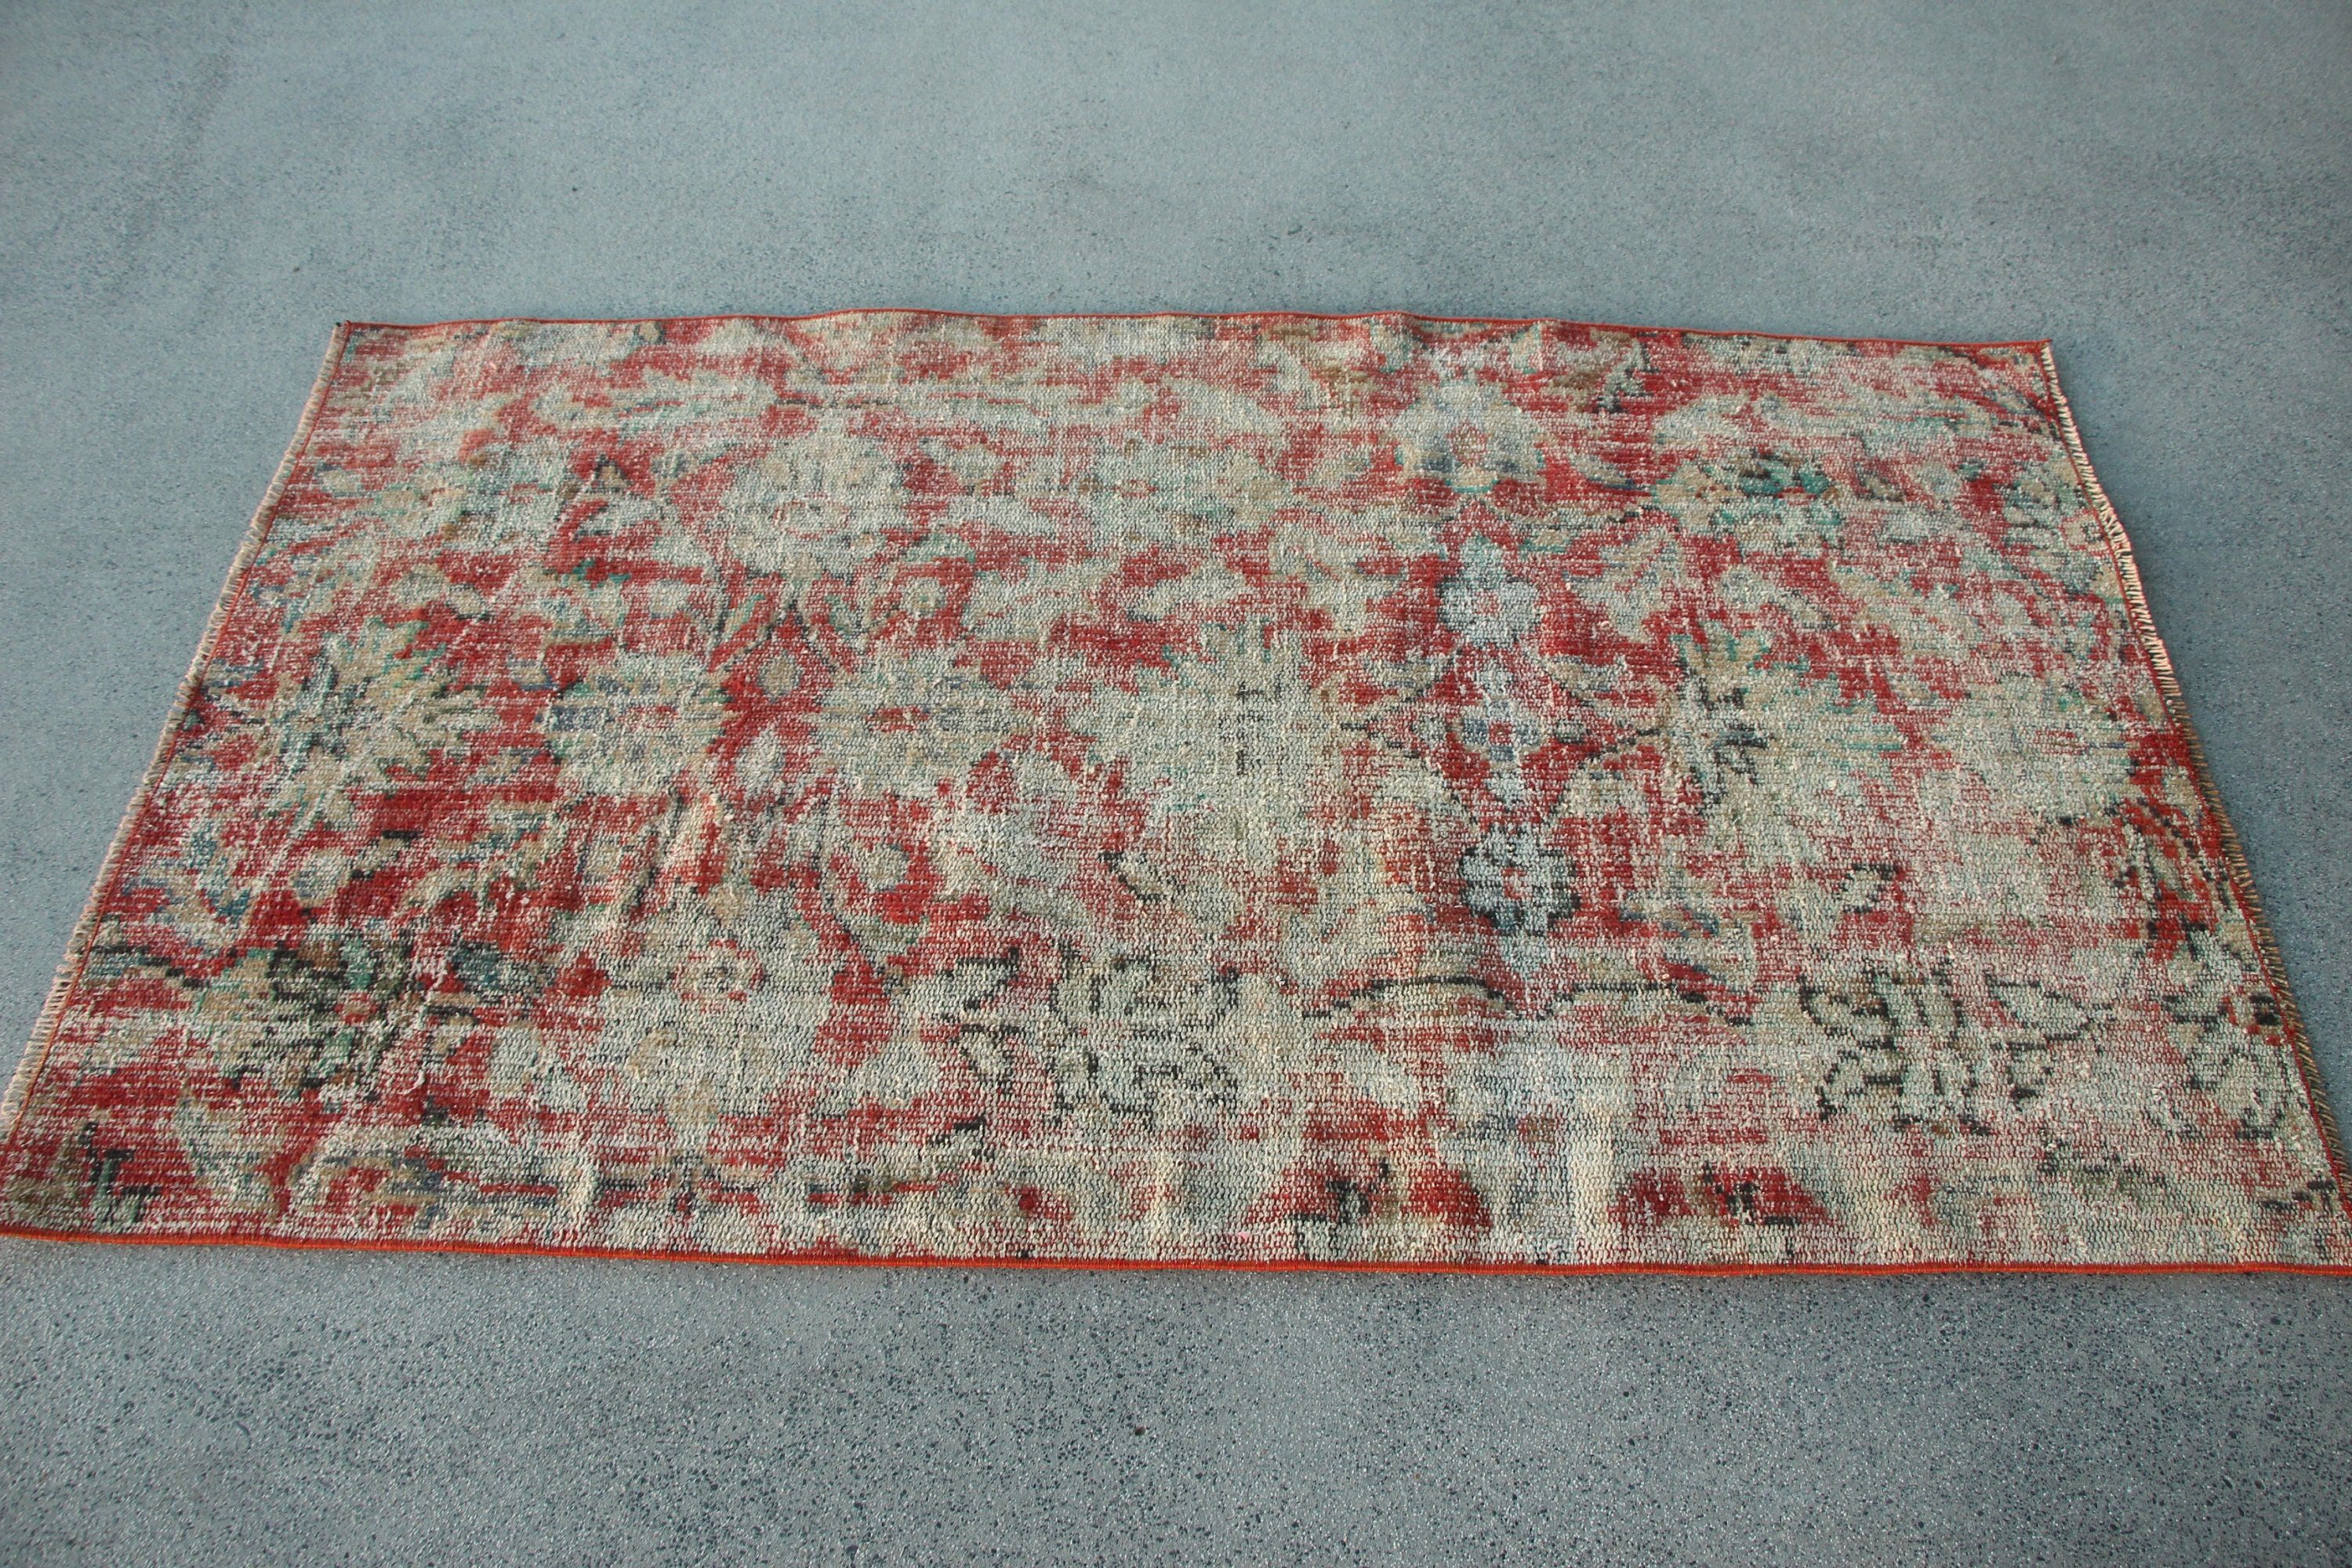 Entry Rugs, Kitchen Rug, Ethnic Rug, Oushak Rug, Red Cool Rugs, Rugs for Entry, Turkish Rug, Tribal Rug, 3.3x5.6 ft Accent Rug, Vintage Rug